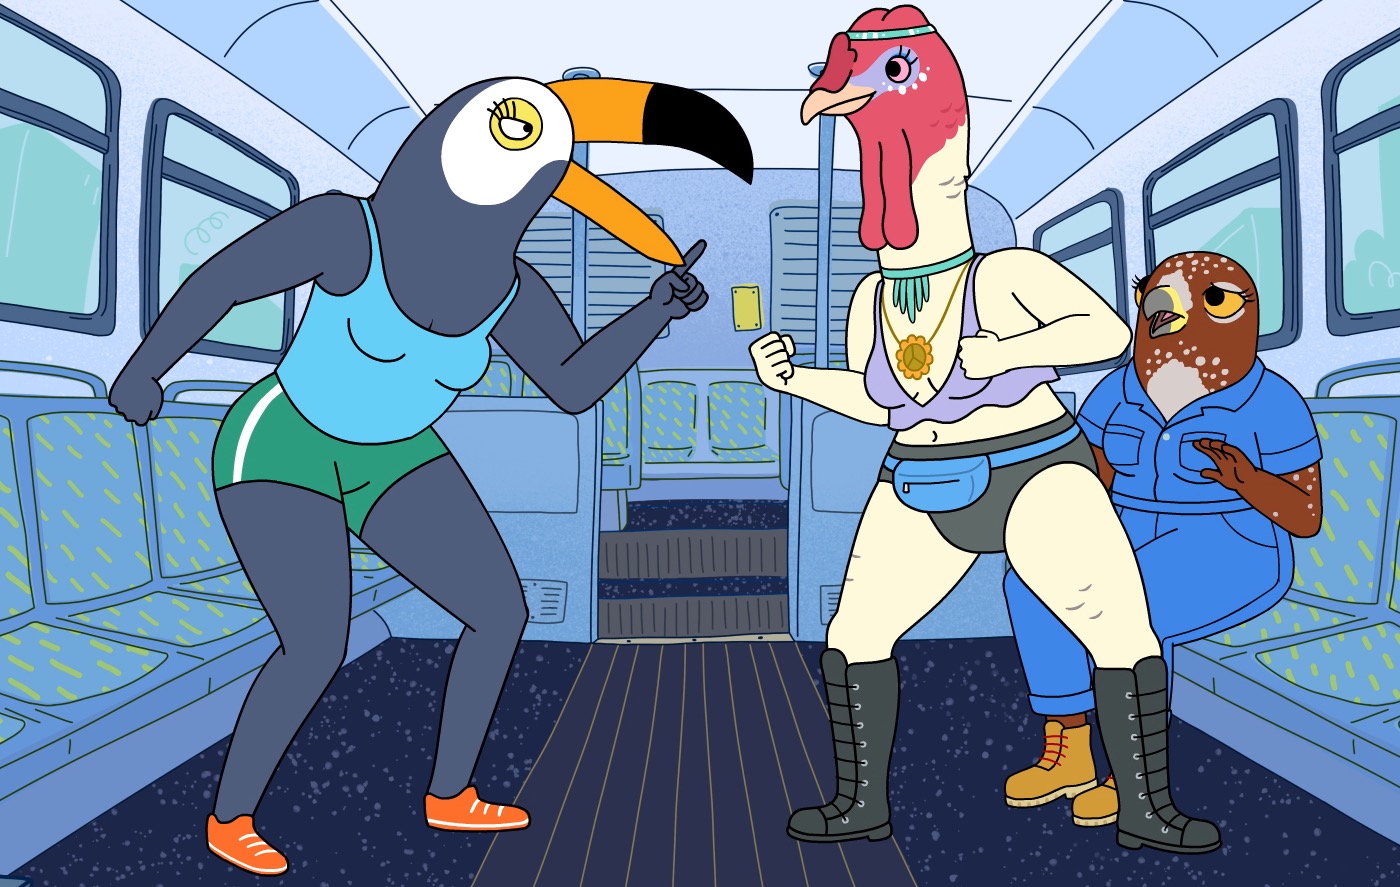 The Second Coming of <i></noscript>
<p> </p>
<p><strong>SPIN: It’s well known that Netflix doesn’t share viewership information, which is very frustrating for creators. Were you surprised that <em>Tuca & Bertie</em> got canceled only two months after it premiered, or did you see it coming?</strong><br />
<strong>Lisa Hanawalt:</strong> No, I was surprised. They made that decision much quicker than after two months, right? We were only able to tell people then. I felt very confident that we delivered a really good show — based on the critical response and feedback from people who were watching the show. It really seemed like it was connecting with people. We were definitely blindsided.</p>
<p><strong>It’s been pointed out that it was a bad look for Netflix to cancel a show with two women of color as the leads so quickly after it premiered.</strong><br />
I mean, I would like it to not be remarkable that the show features women or has a cast with people of color in it. That shouldn’t be the most important thing about the show. But that’s the landscape we’re in right now, that it still seems remarkable or rare for some reason, which is kind of a bummer. I would like more shows to have that demographic. I think more and more are coming out, but they don’t always get as big of a chance as those shows with more traditional white male creators.</p>
<p><strong>For now the show will be released week to week, and there are a little more restrictions on Adult Swim than on Netflix. Has that changed the way you’ve approached making the show?</strong><br />
Not really, I’ve always liked the show to have an episodic feel in addition to having the larger story arcs go throughout the entire season. I want each episode to feel special so that you can drop in at any moment and understand the self-contained little story of the episode. So I just leaned into that a little harder, knowing that it would come out weekly.</p>
<p><strong>Where did the idea for the show come from? Was it something you came up with as <em>BoJack Horseman</em> was winding down, or has it been percolating in your mind before that?</strong><br />
I had made this webcomic about Tuca for Hazlitt and Bertie kind of came out of this comic I did for Lucky Peach, where I made a comic about a bird couple getting a new house, so those characters turned into Bertie and Speckle. And just at some point while working on <em>BoJack</em>, Raphael started asking me if I had an idea for my own show, and I had been starting to think about it a little bit. So then we just talked about it for a few years and very slowly developed this idea.</p>
<p> </p>
<img src=